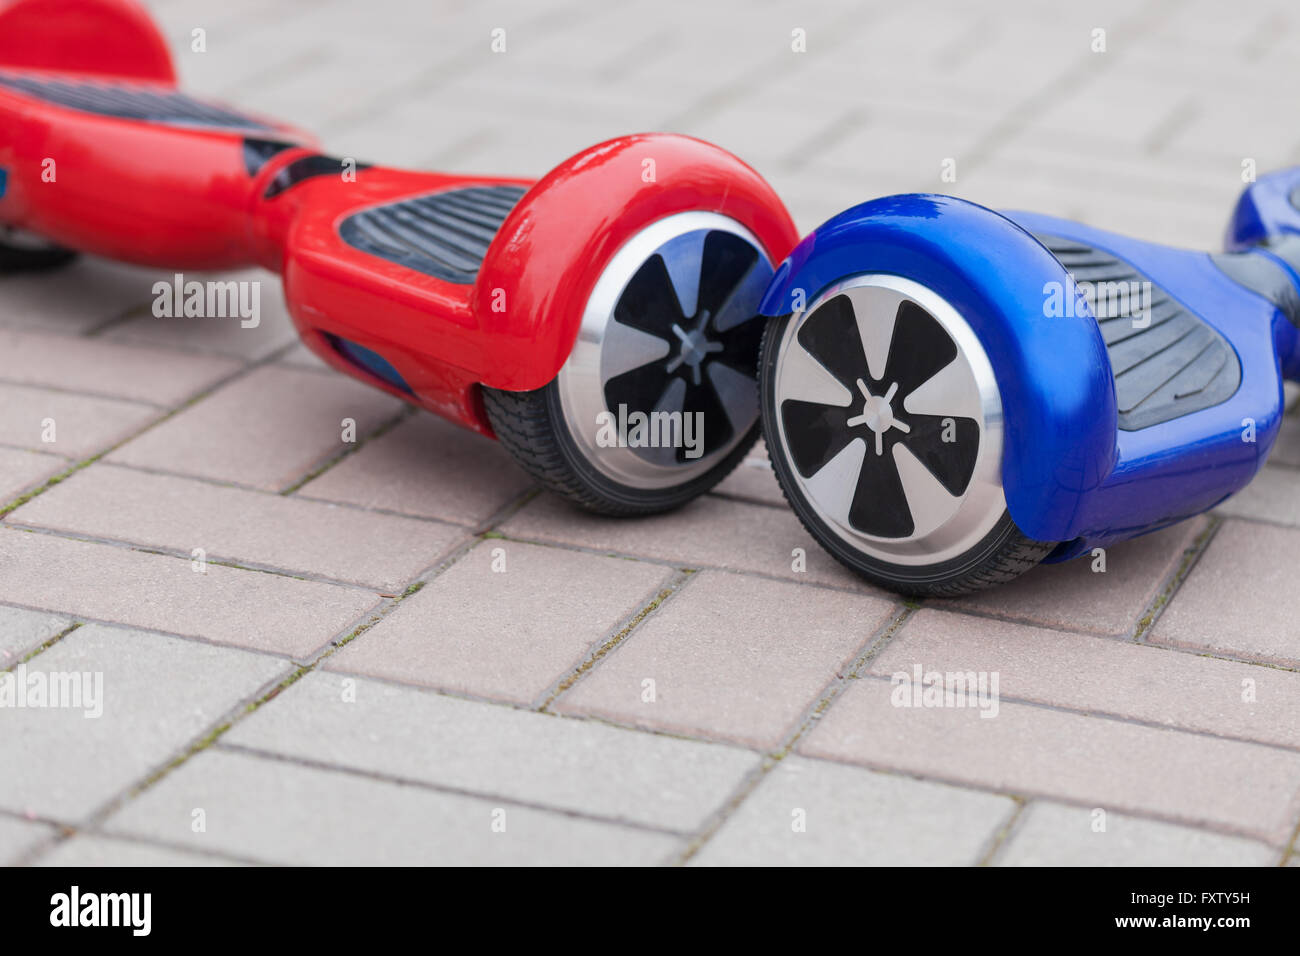 Modern transportation technology - electric mini segway scooter hover board. Easy and fun way to ride the city streets. Trending new gadget that became very popular among youth and adults. This is the future of energy effetive personal urban transport that produces no pollution to the atmosphere. Stock Photo